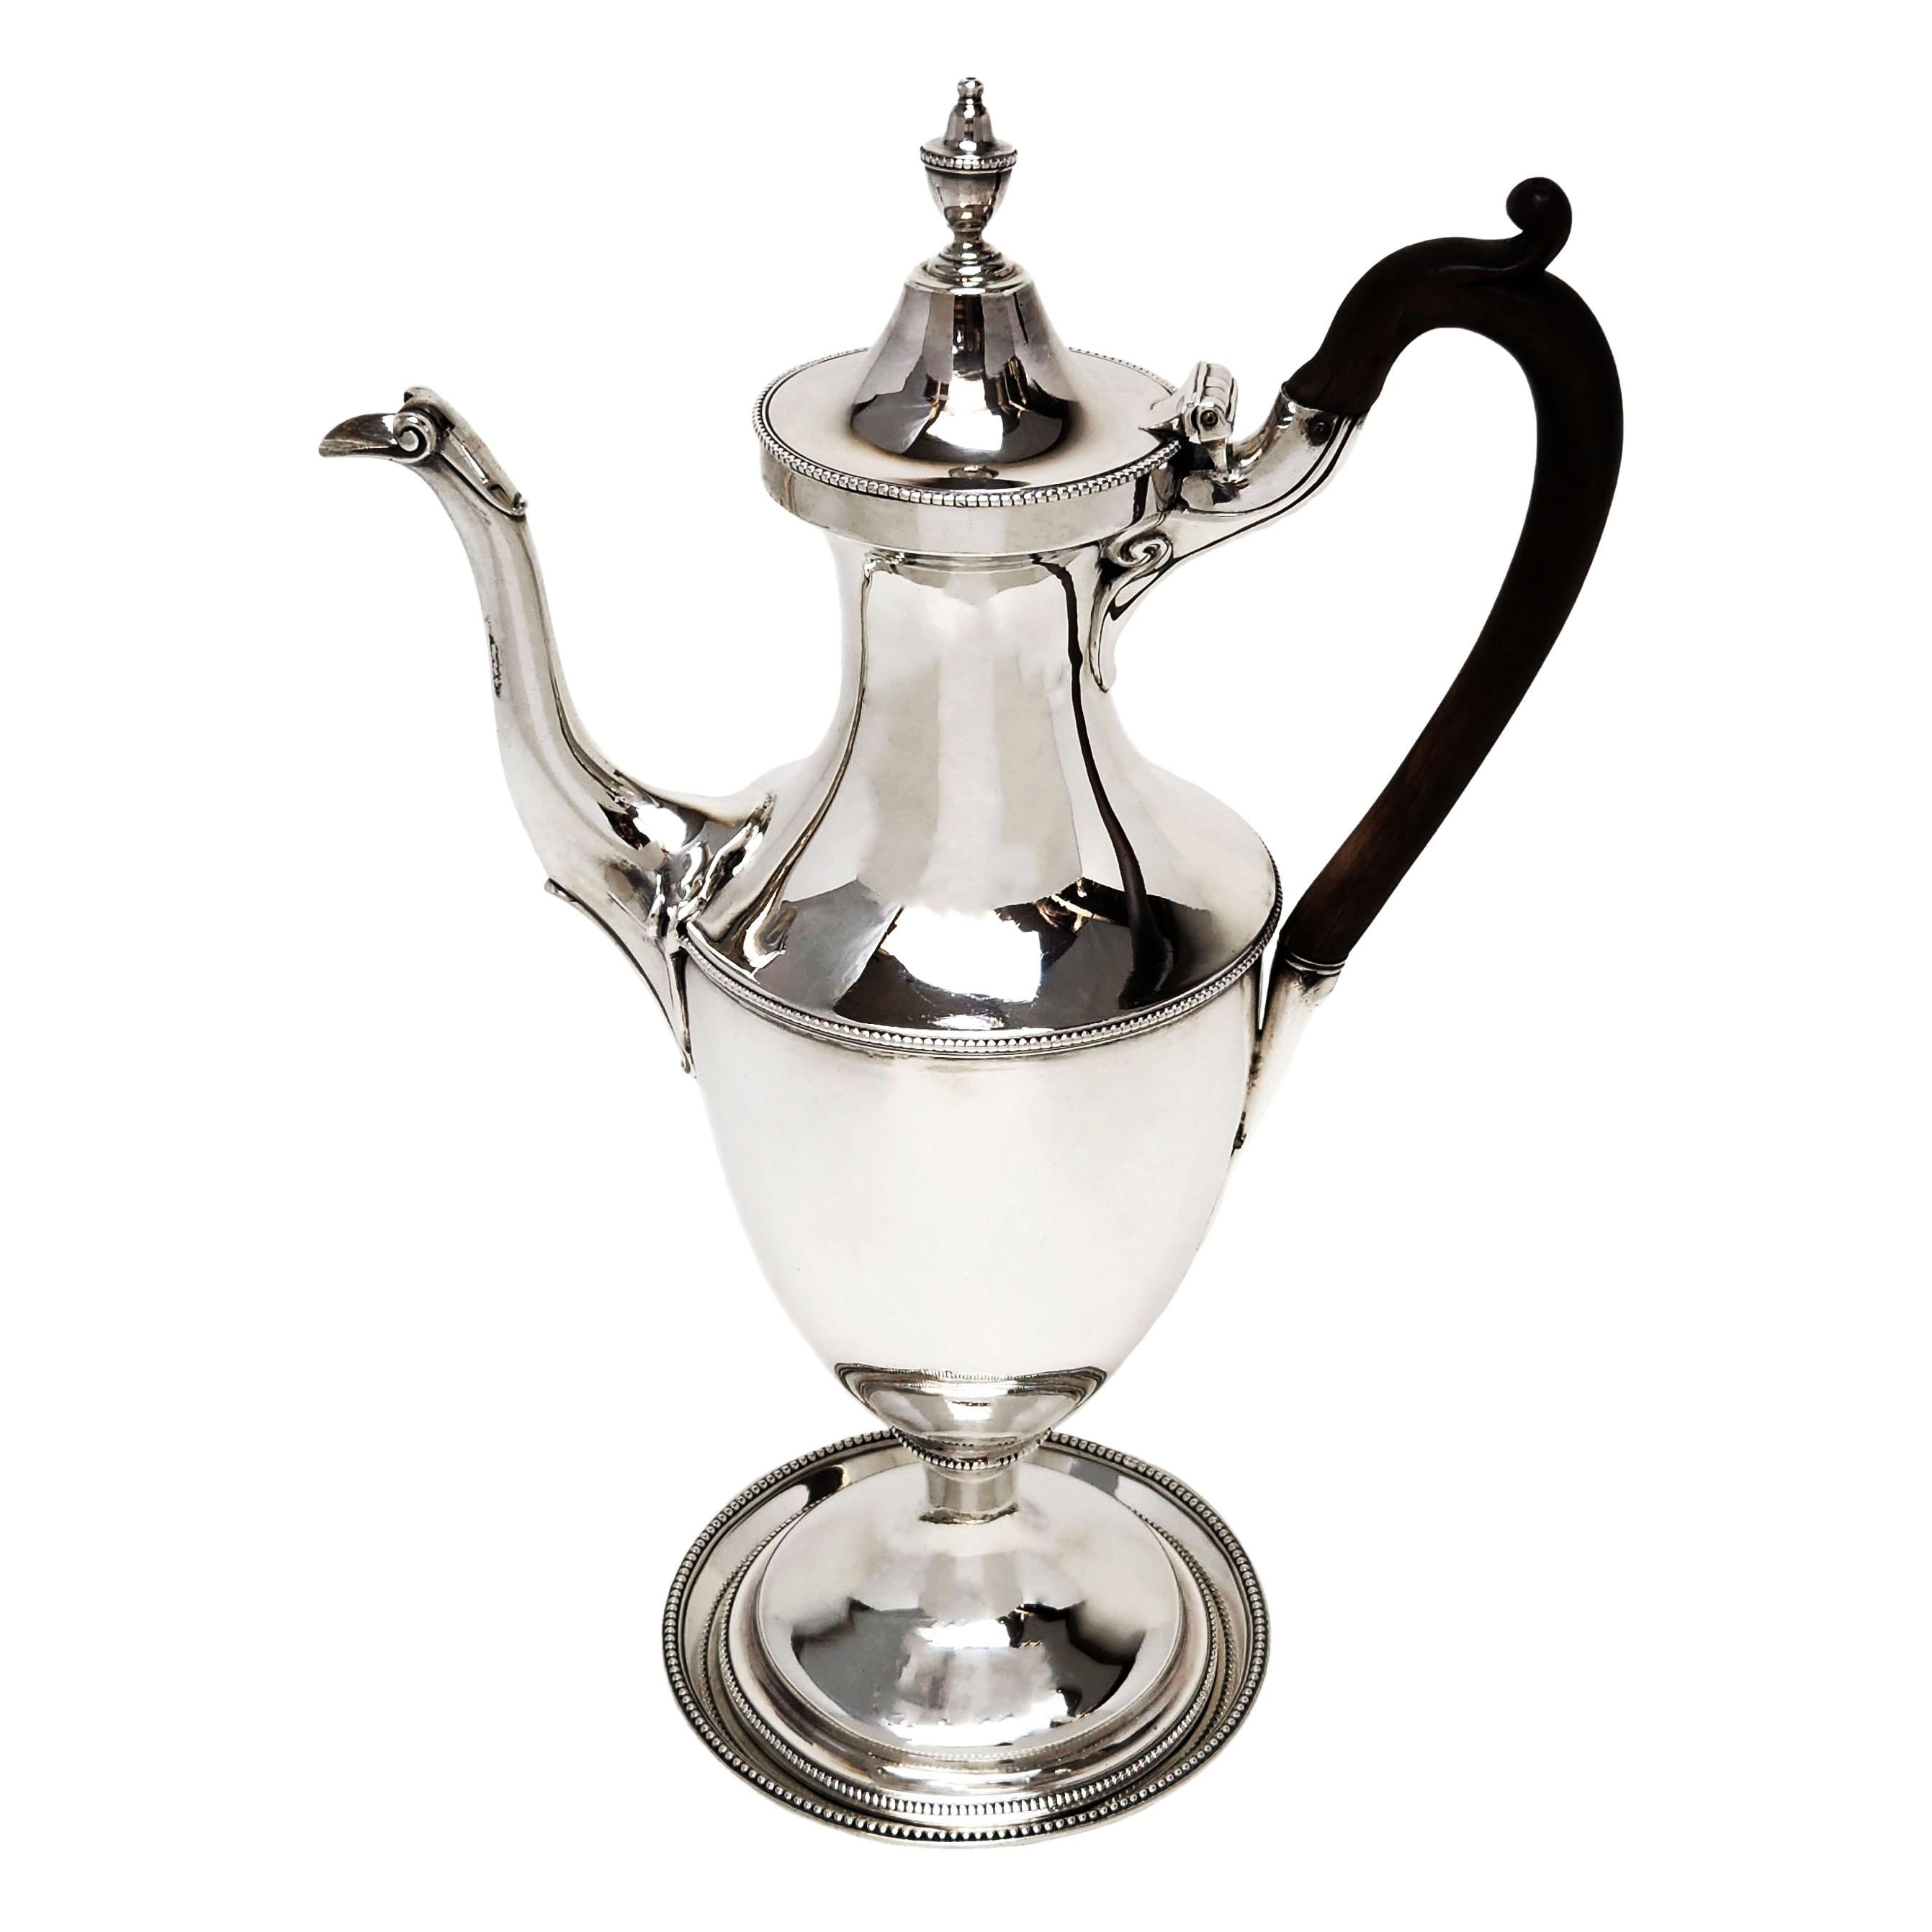 An impressive Antique George III Sterling Silver Coffee Pot on a Silver Stand. This classic Georgian Coffee Pot has a subtle bead edged border on the lid, shoulder, column and base. The Coffee Pot has a wooden handle. The Stand has a round form and